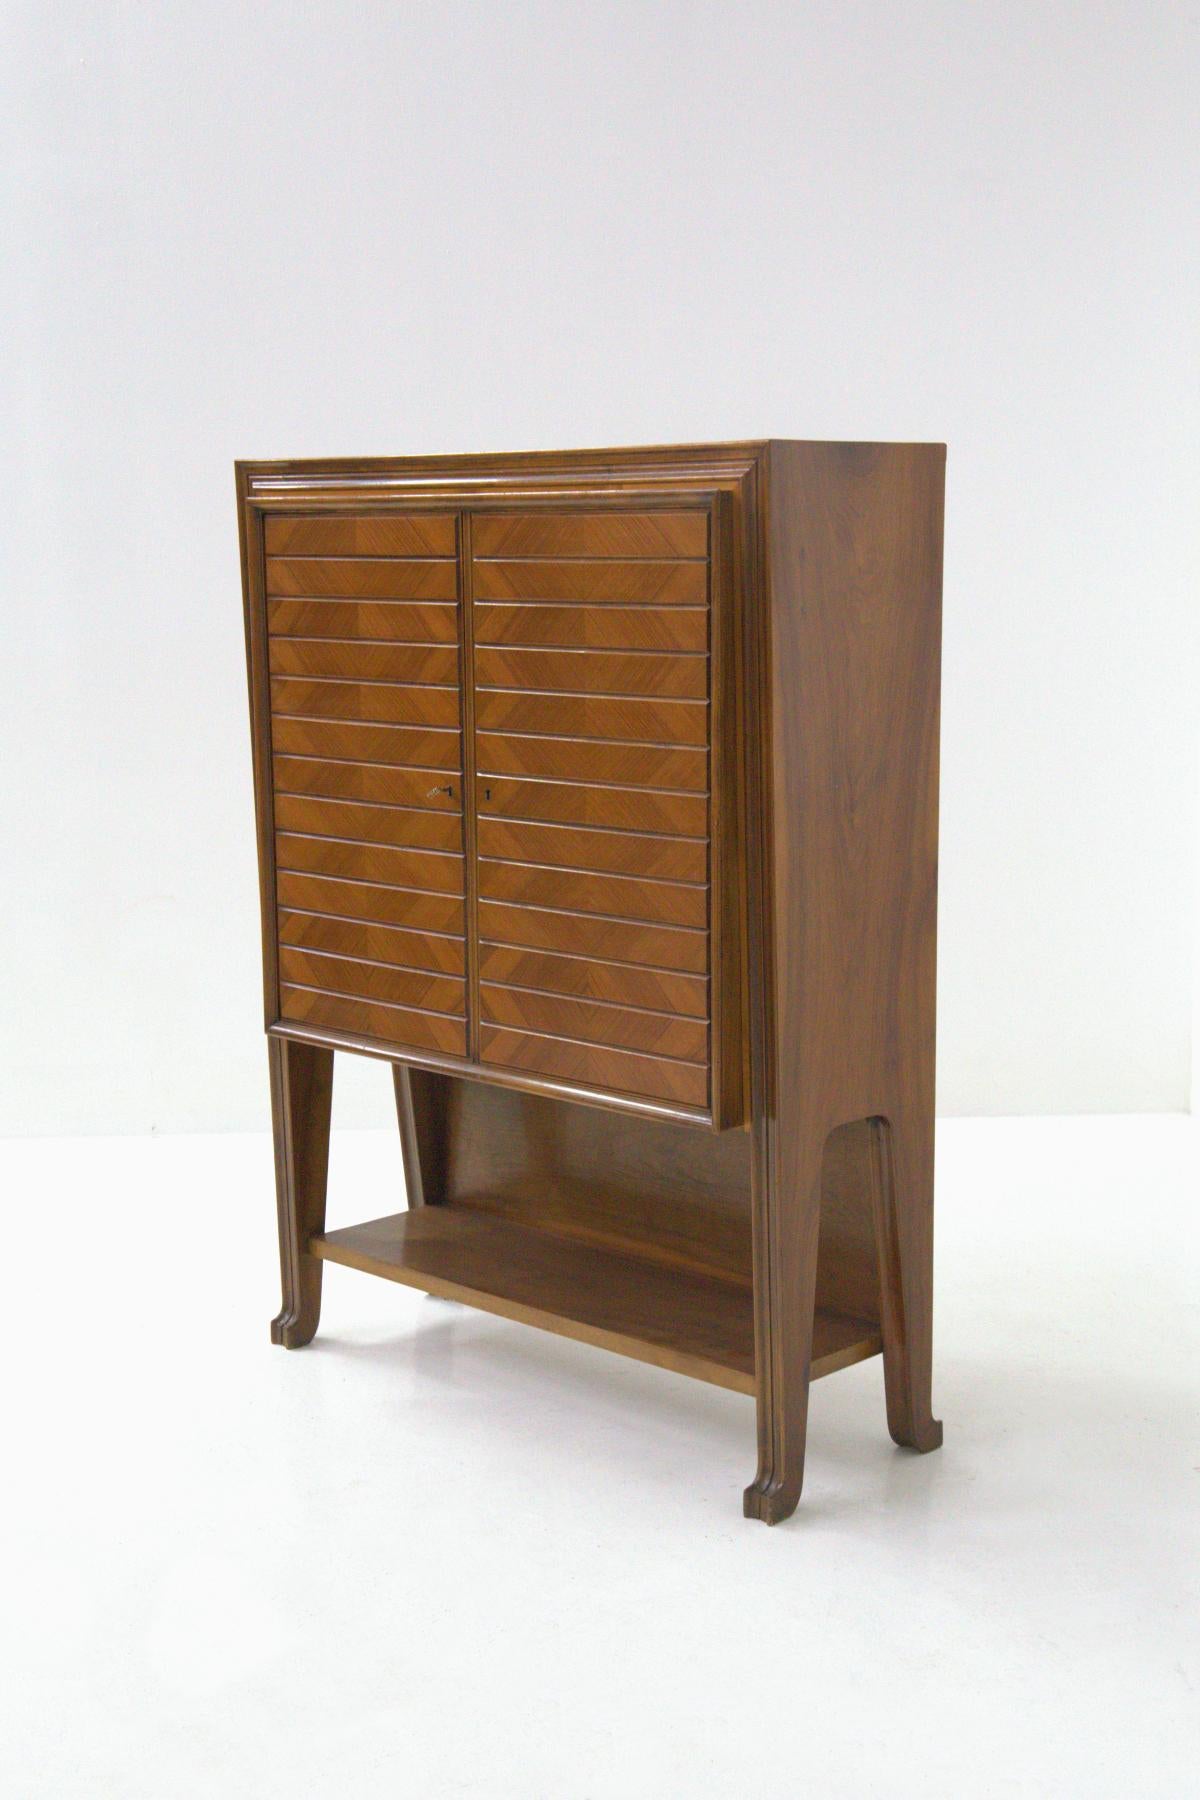 Elegant, sophisticated, and of great importance. We present this great example of Italian cabinetry made by Osvaldo Borsani with present label from the 1950s. The cabinet is a tall chest of drawers is made of walnut for its exterior while the